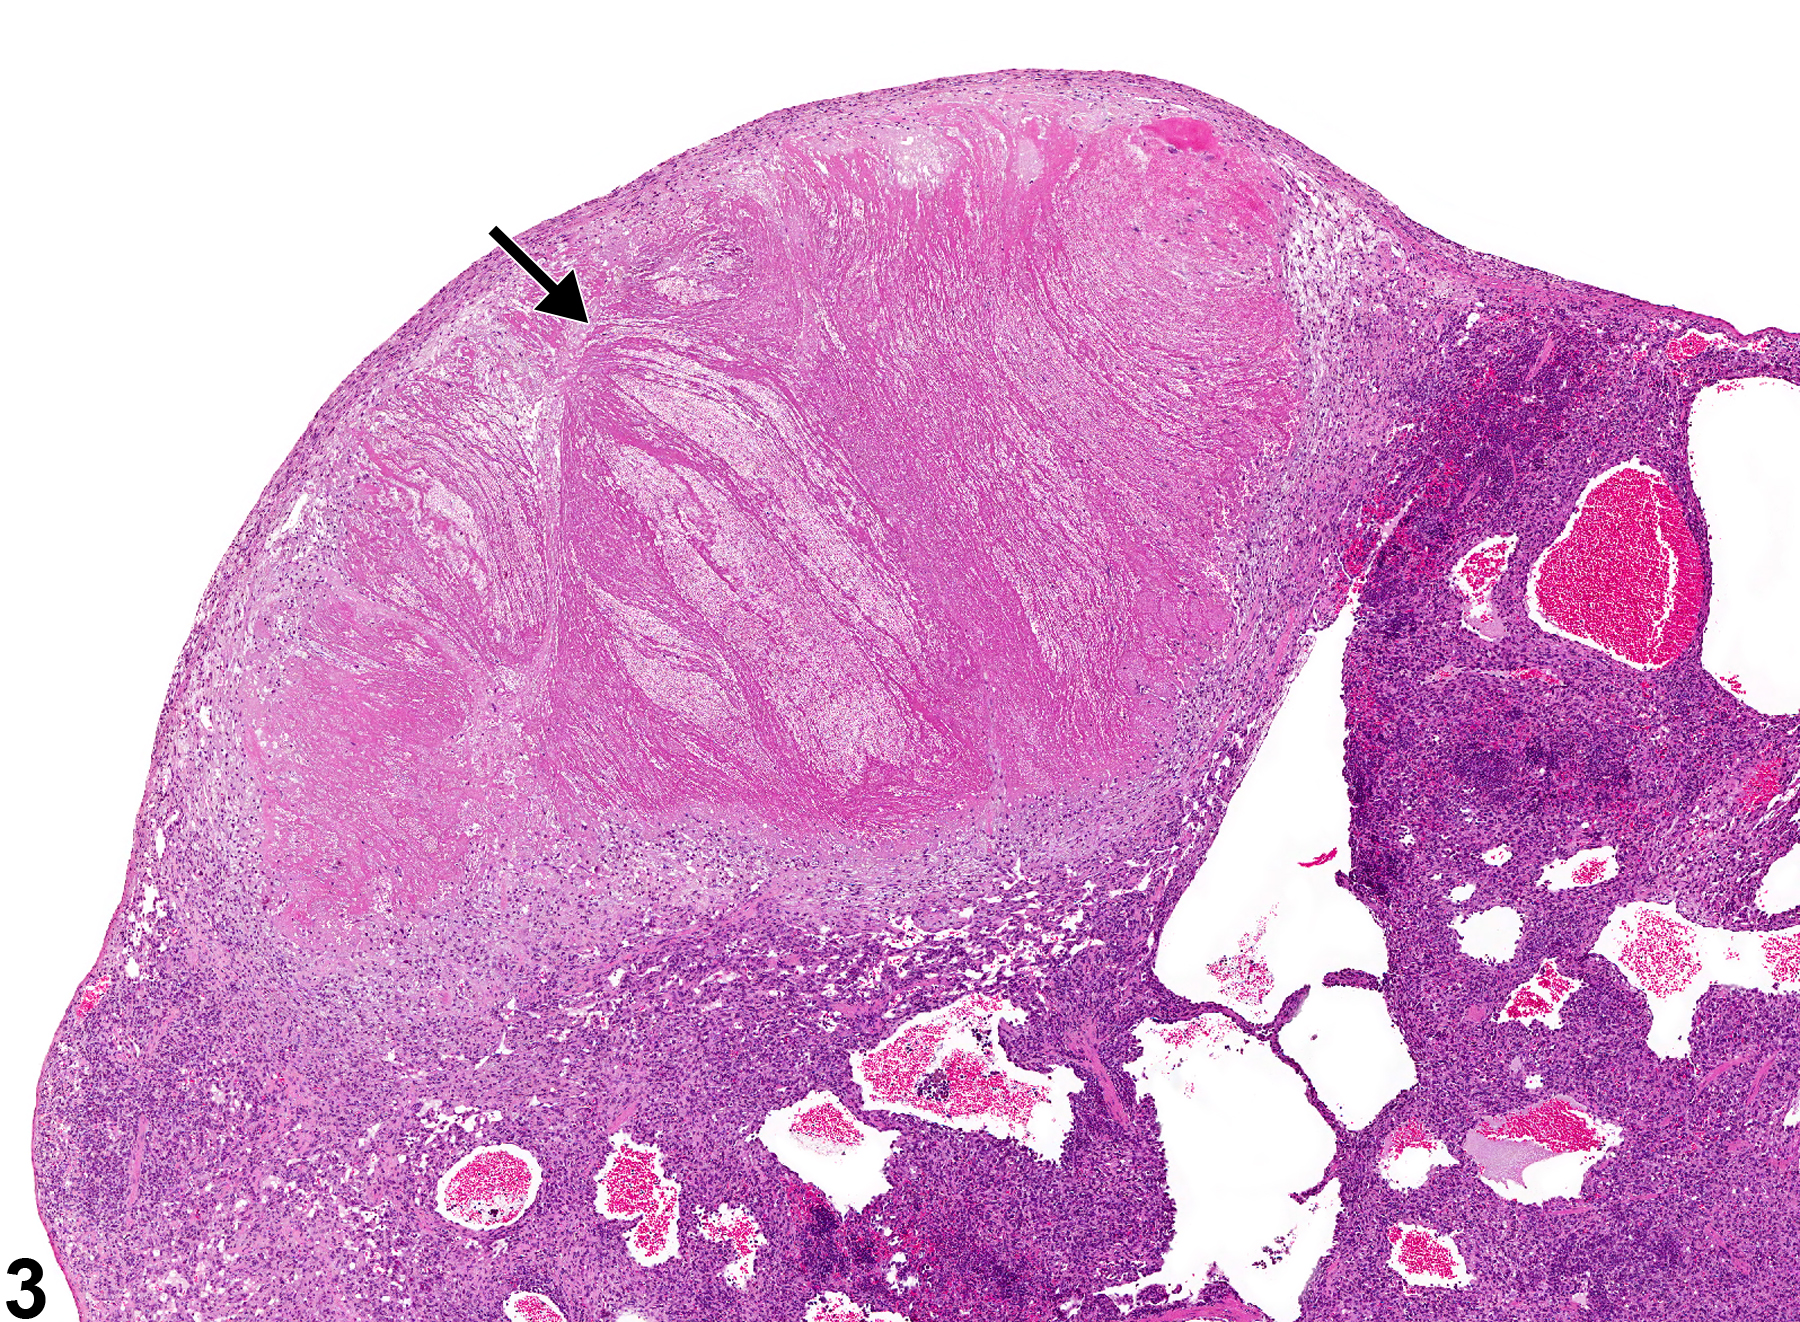 Image of necrosis in the spleen from a male B6C3F1/N mouse in a chronic study